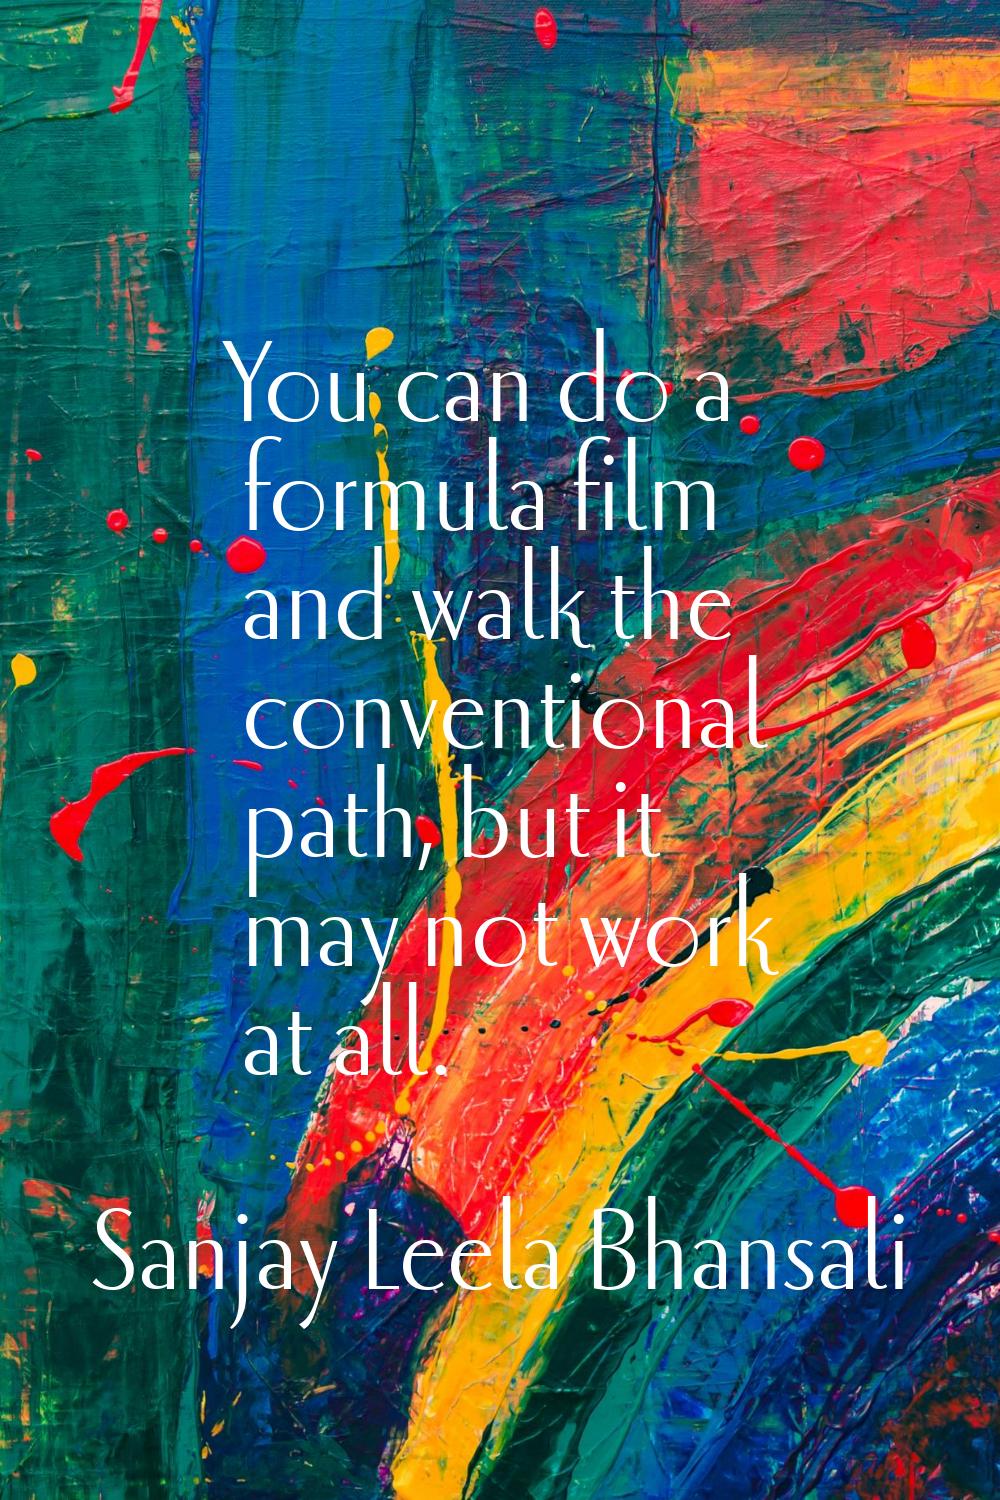 You can do a formula film and walk the conventional path, but it may not work at all.